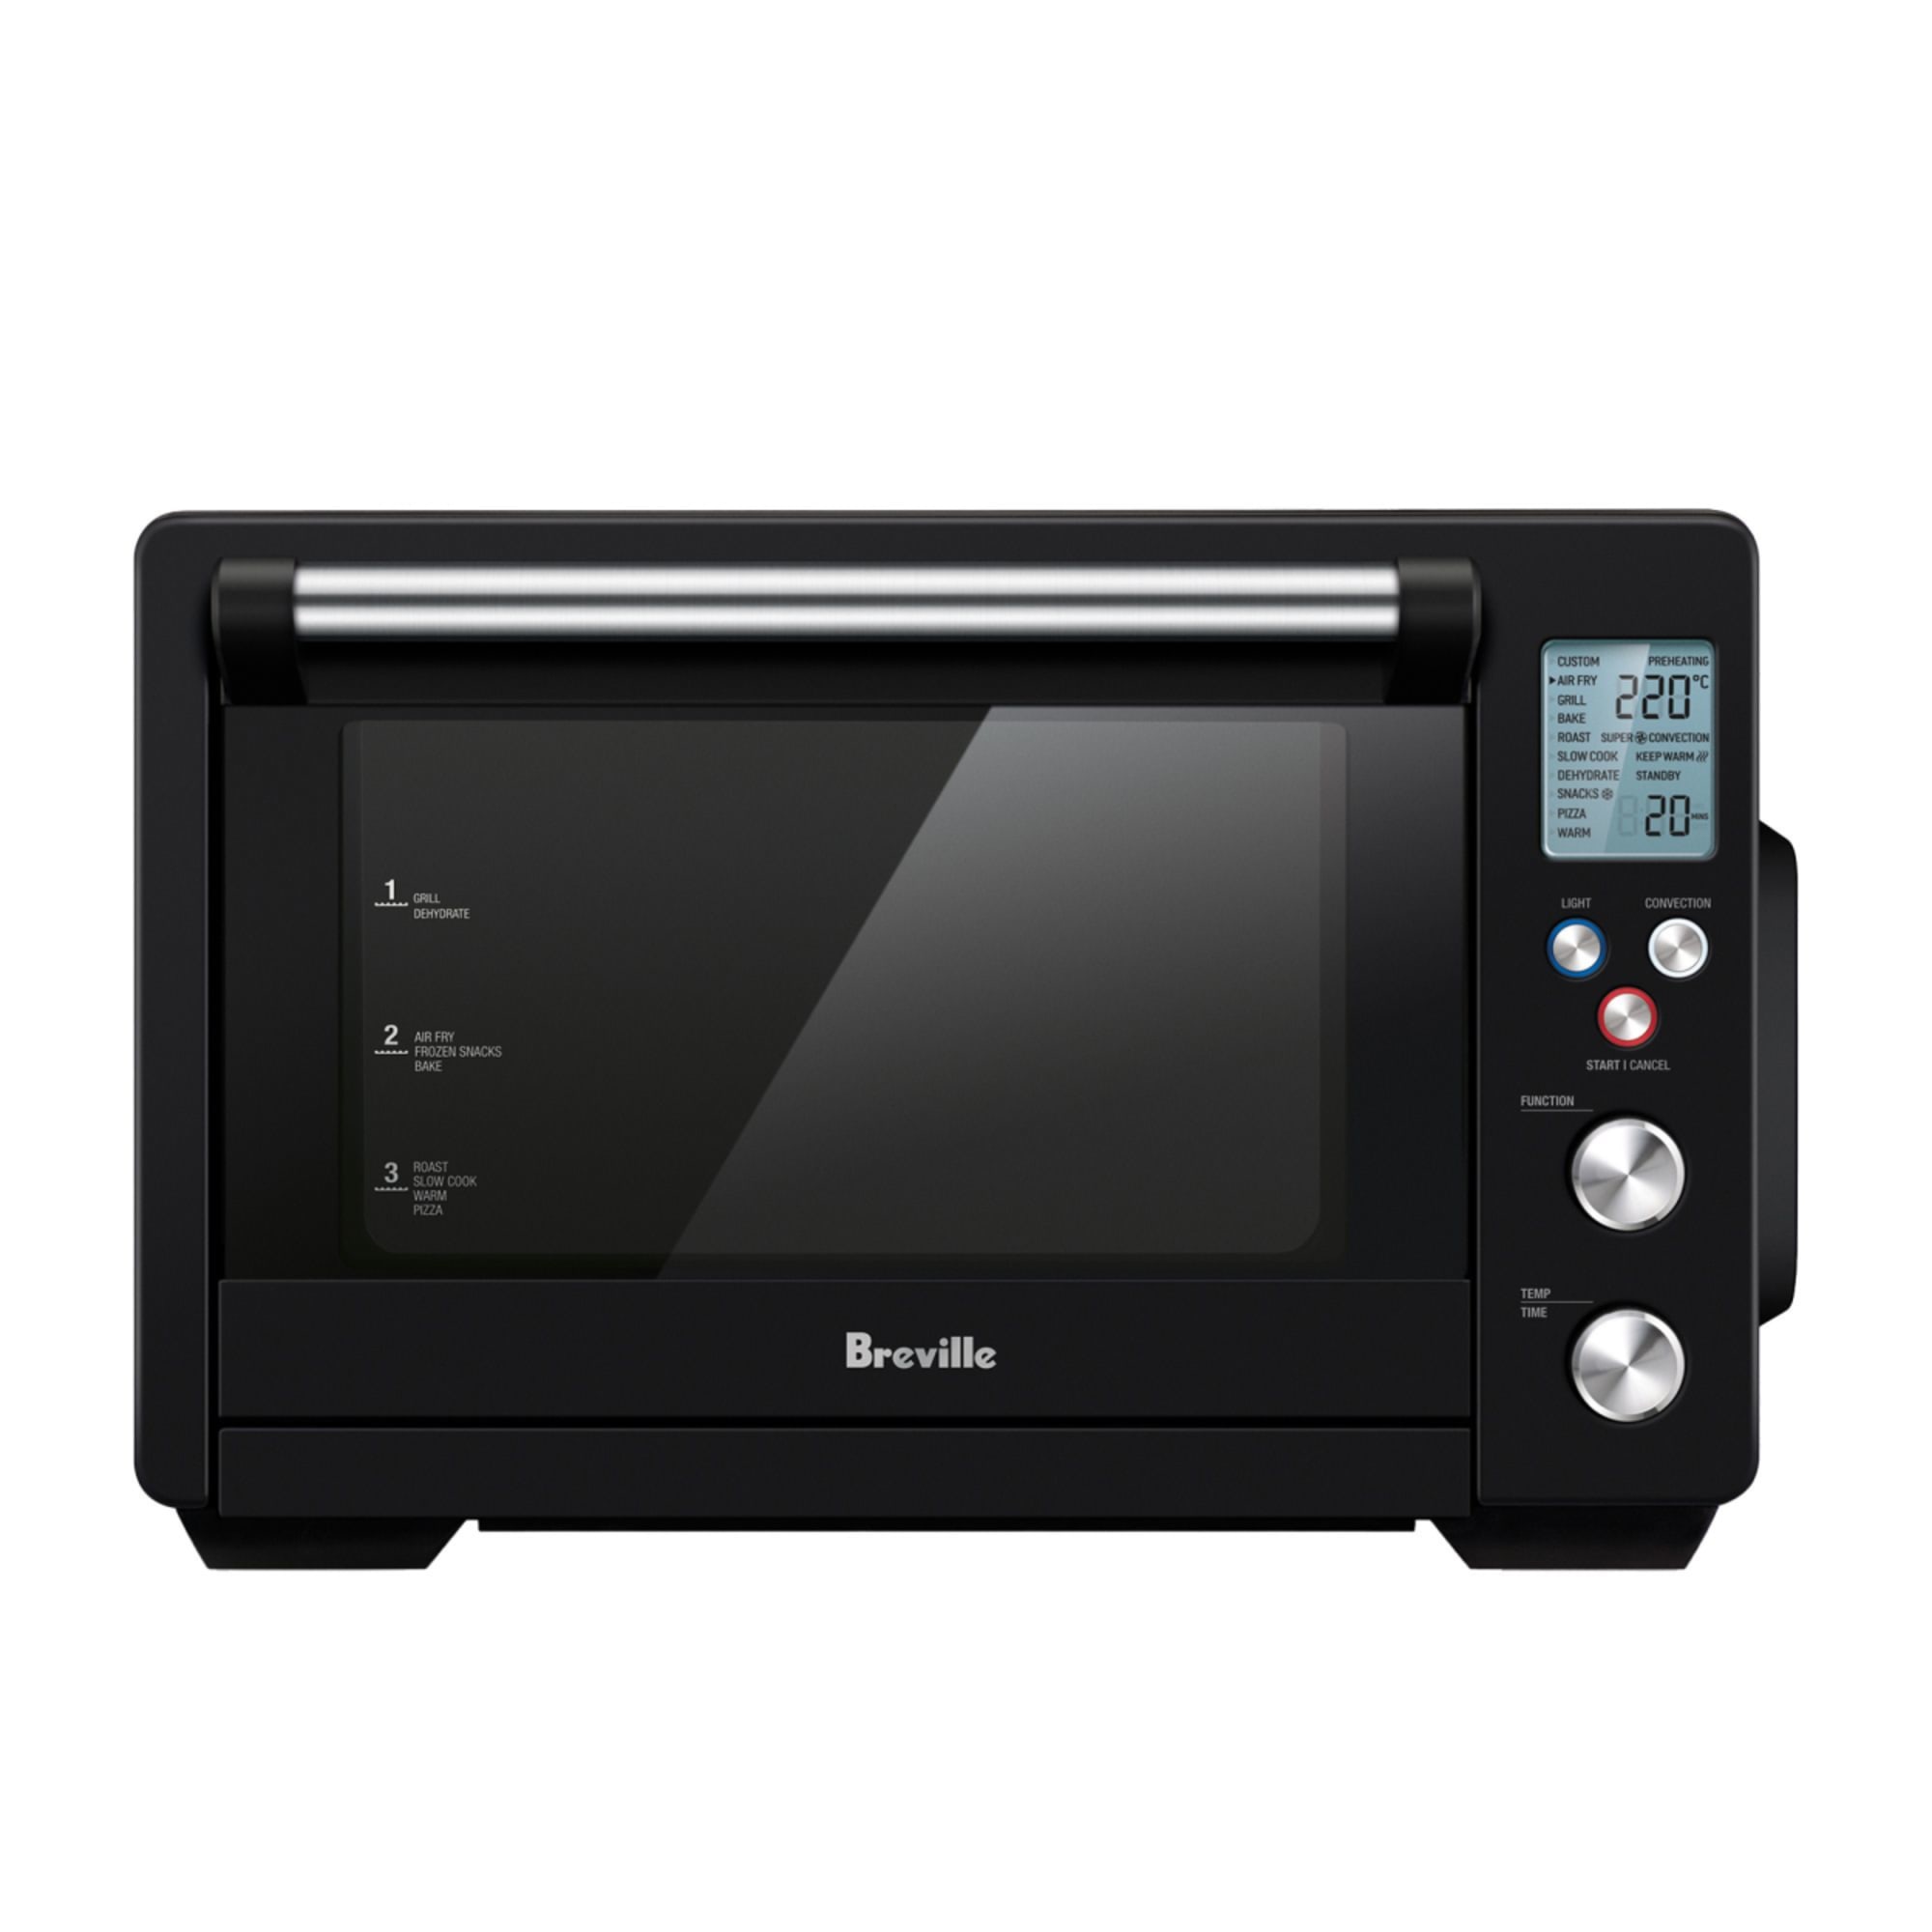 https://res.cloudinary.com/kitchenwarehouse/image/upload/c_fill,g_face,w_1250/f_auto/t_PDP_2000x2000/Supplier%20Images%20/2000px/Breville-the-All-in-One-Compact-Air-Fryer-Matte-Black_1_2000px.jpg?imagetype=pdp_full